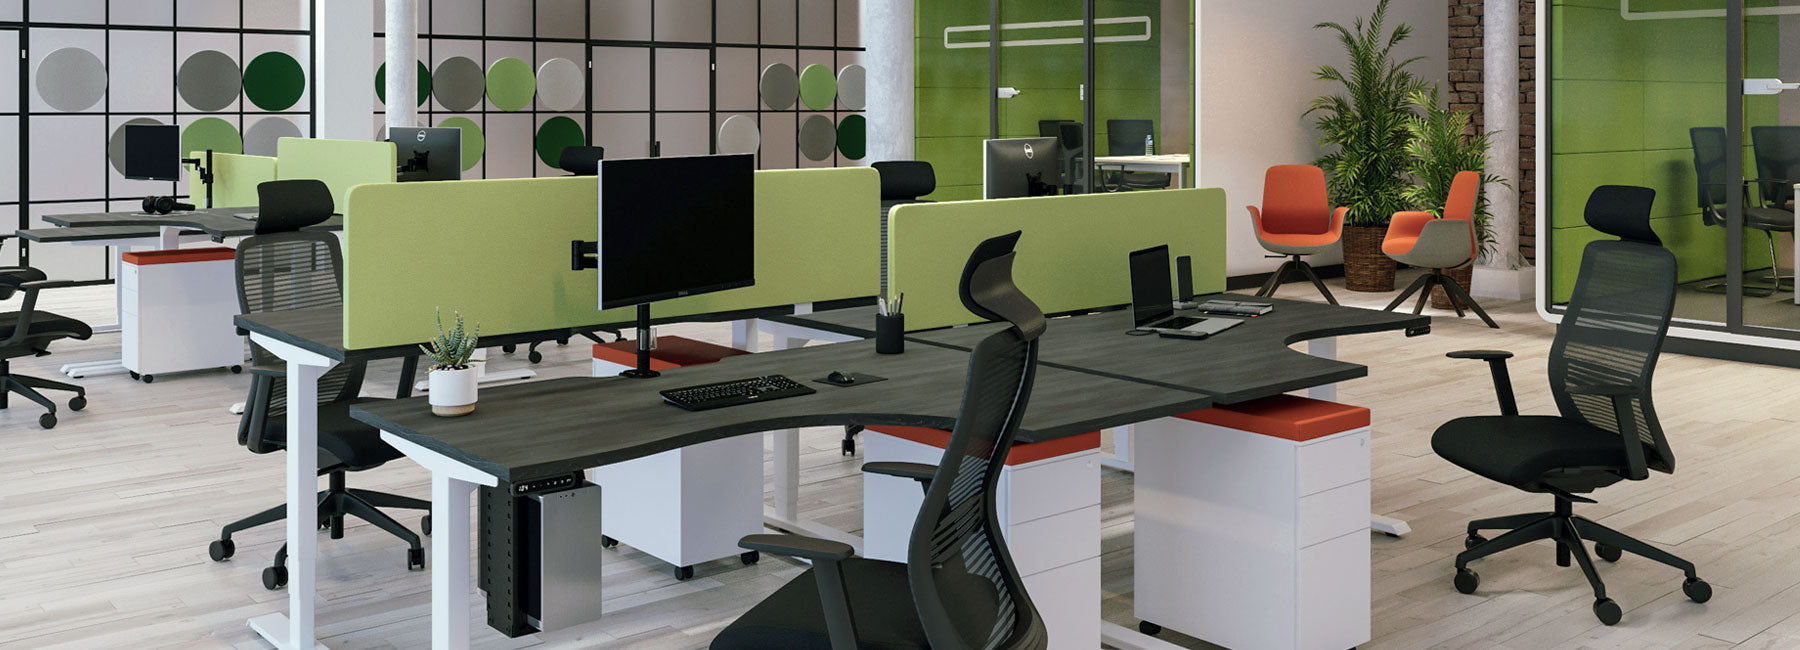 office furniture for workplaces and remote home working